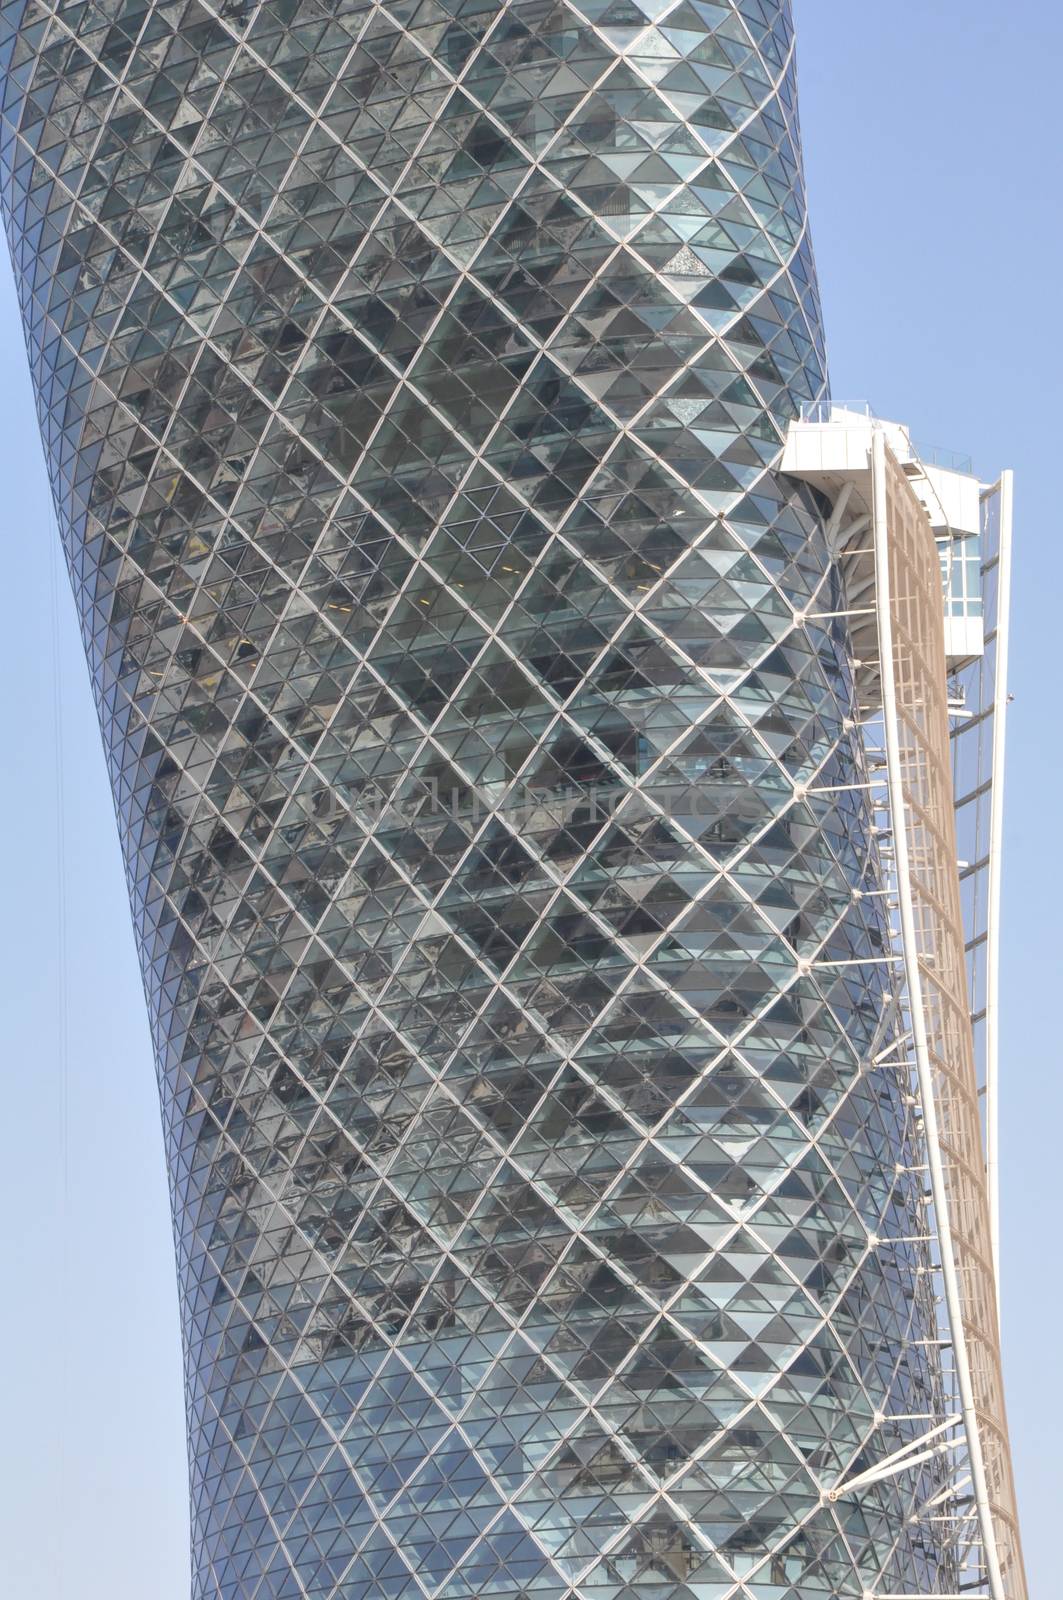 Capital Gate in Abu Dhabi, UAE. In June 2010, Guinness World Records certified Capital Gate as the world's furthest leaning man-made tower.